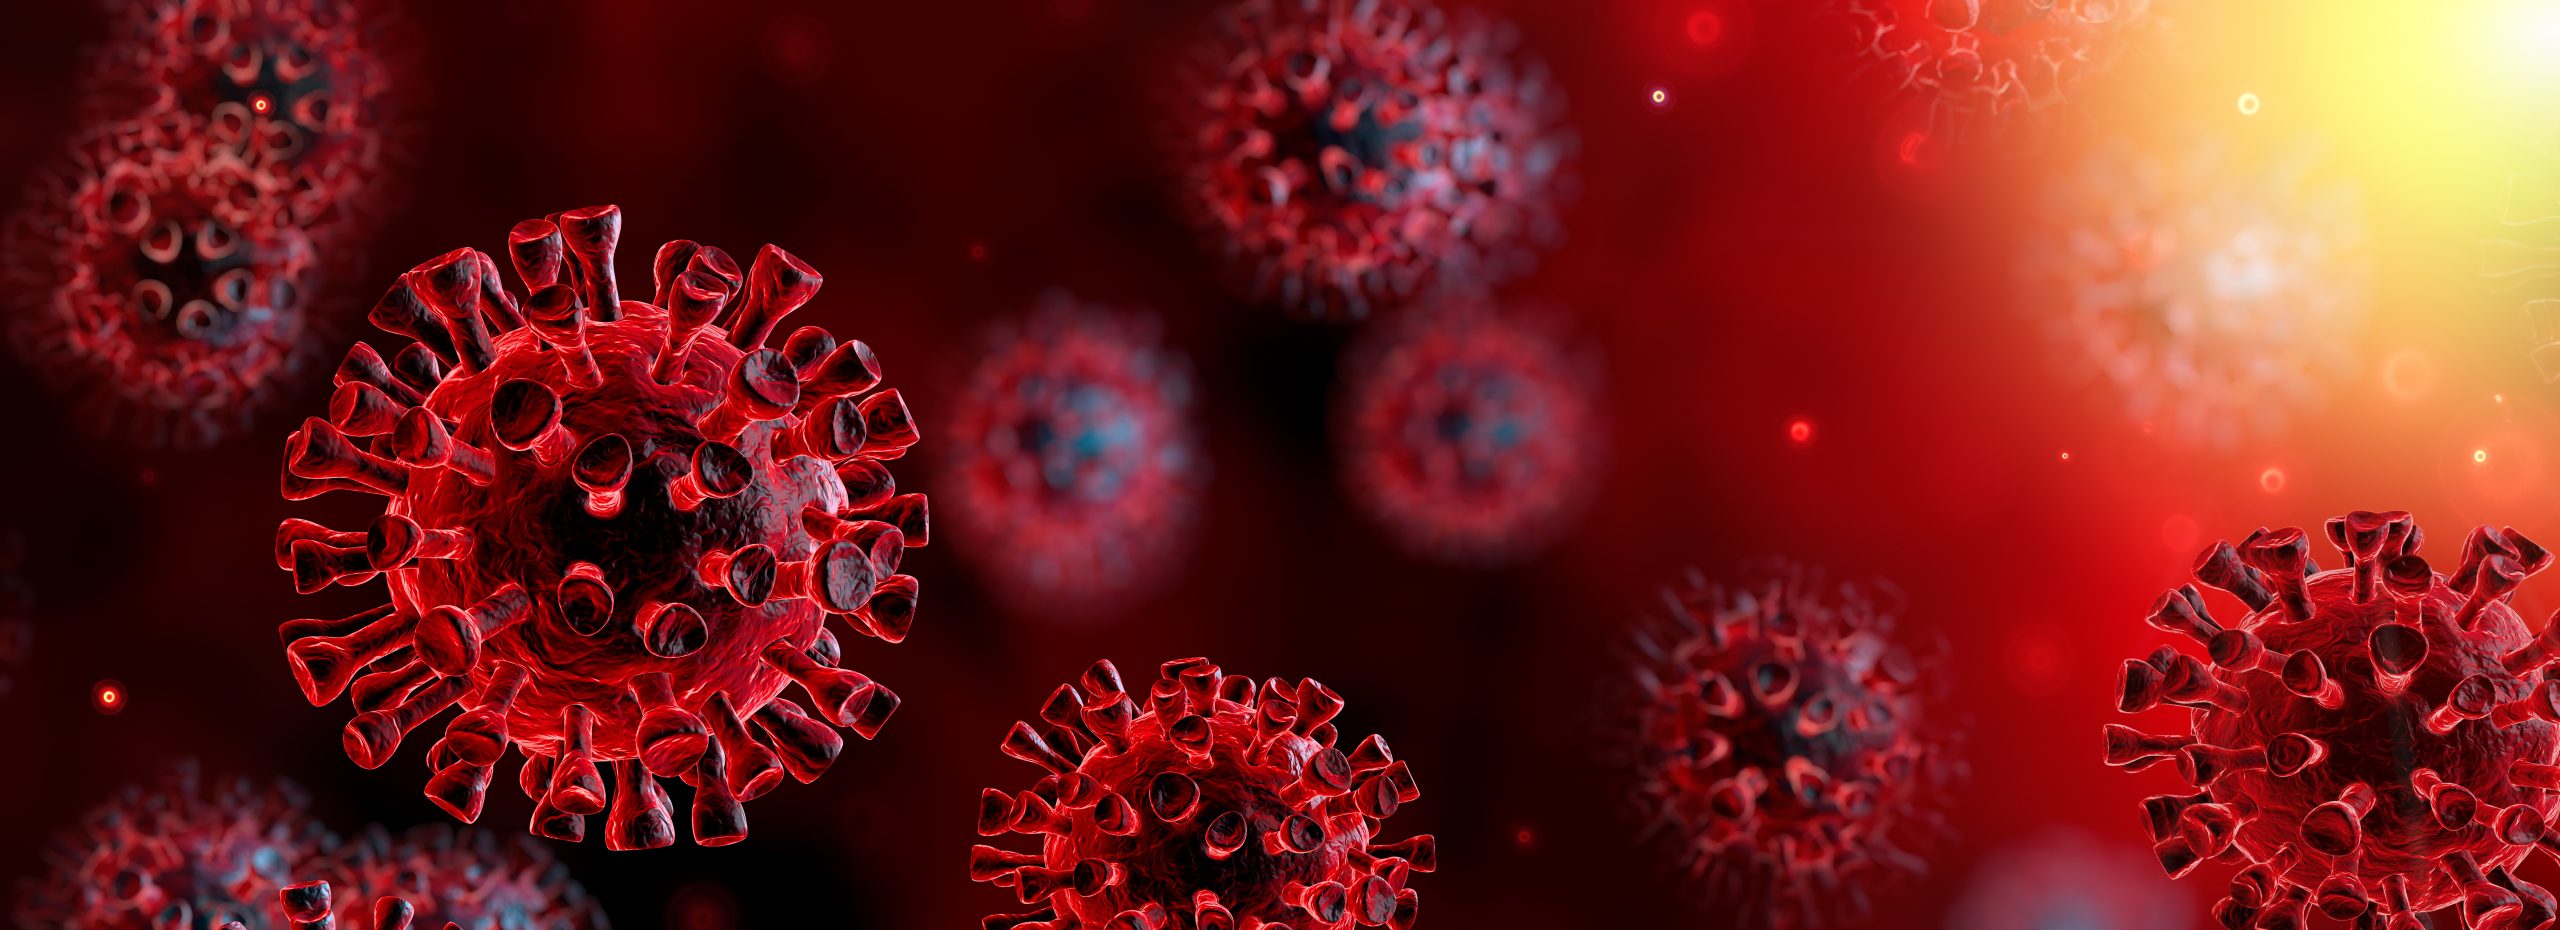 Corona Virus In Red Background - Microbiology And Virology Concept - 3d  Rendering - GO2 for Lung Cancer